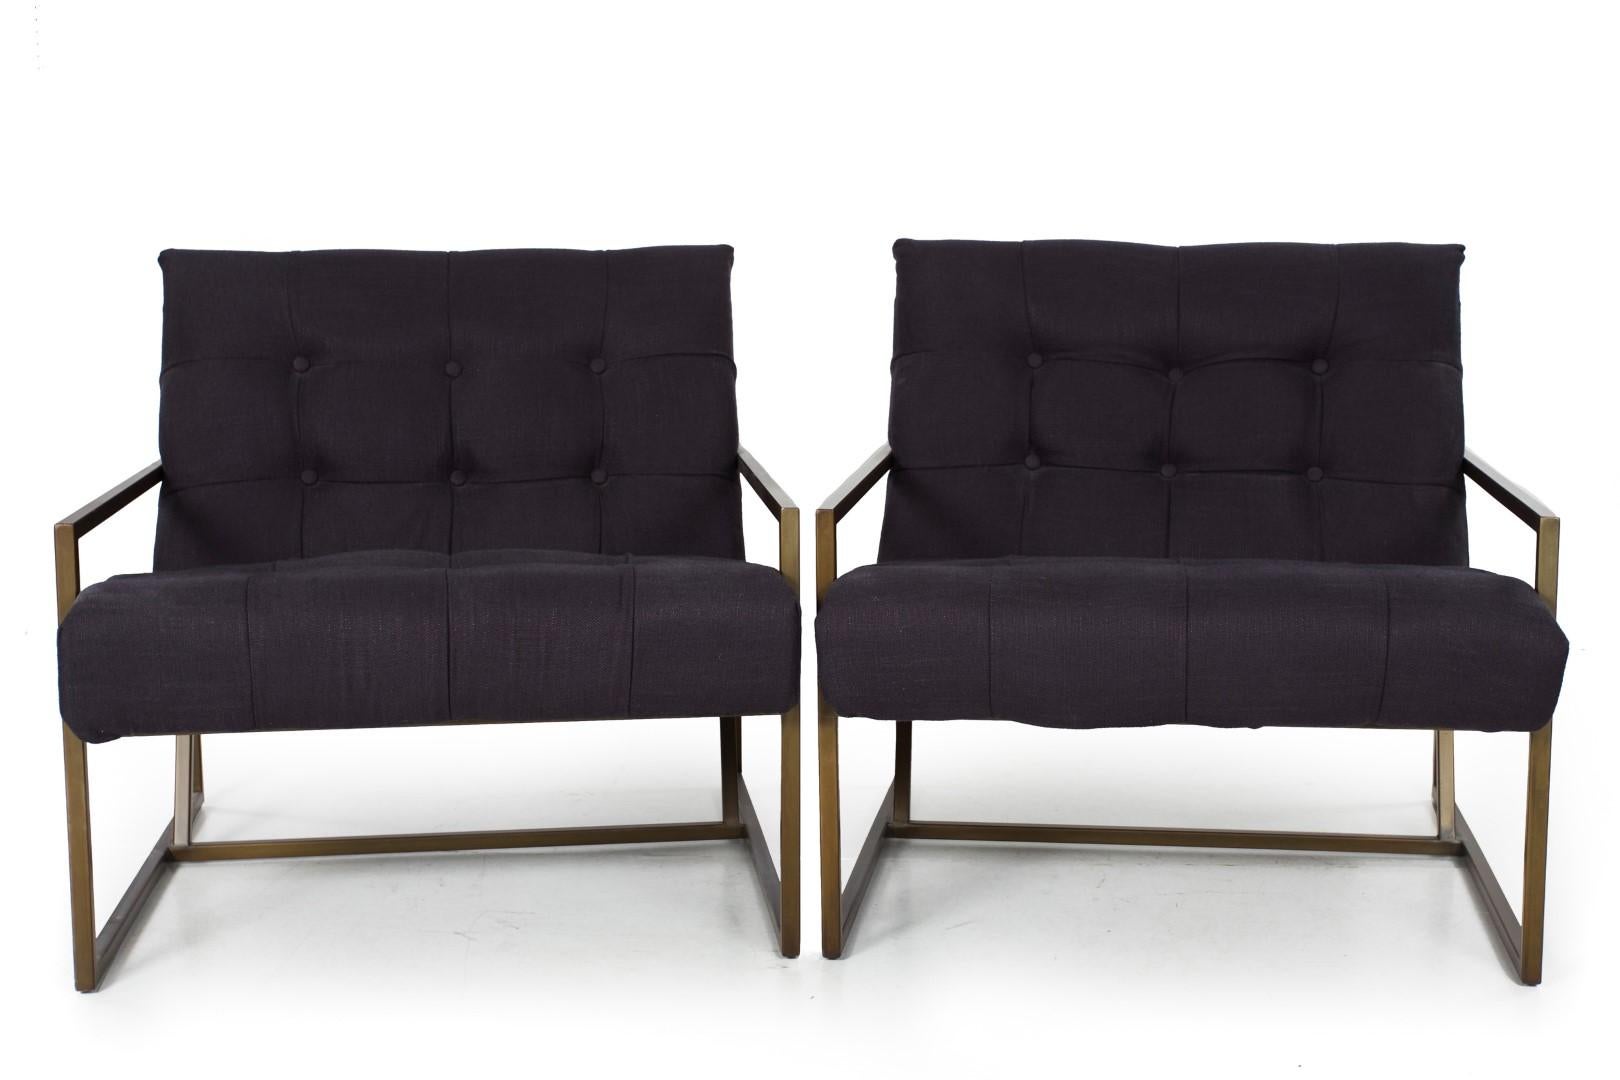 Regina Andrew Pair of Mid-Century Modern Style Tufted Steel Arm Chairs
Item # 710RPP31A

In the mid-century style inspired by the iconic and austere forms of Milo Baughman, this striking chair features a sleek welded steel frame with a brown